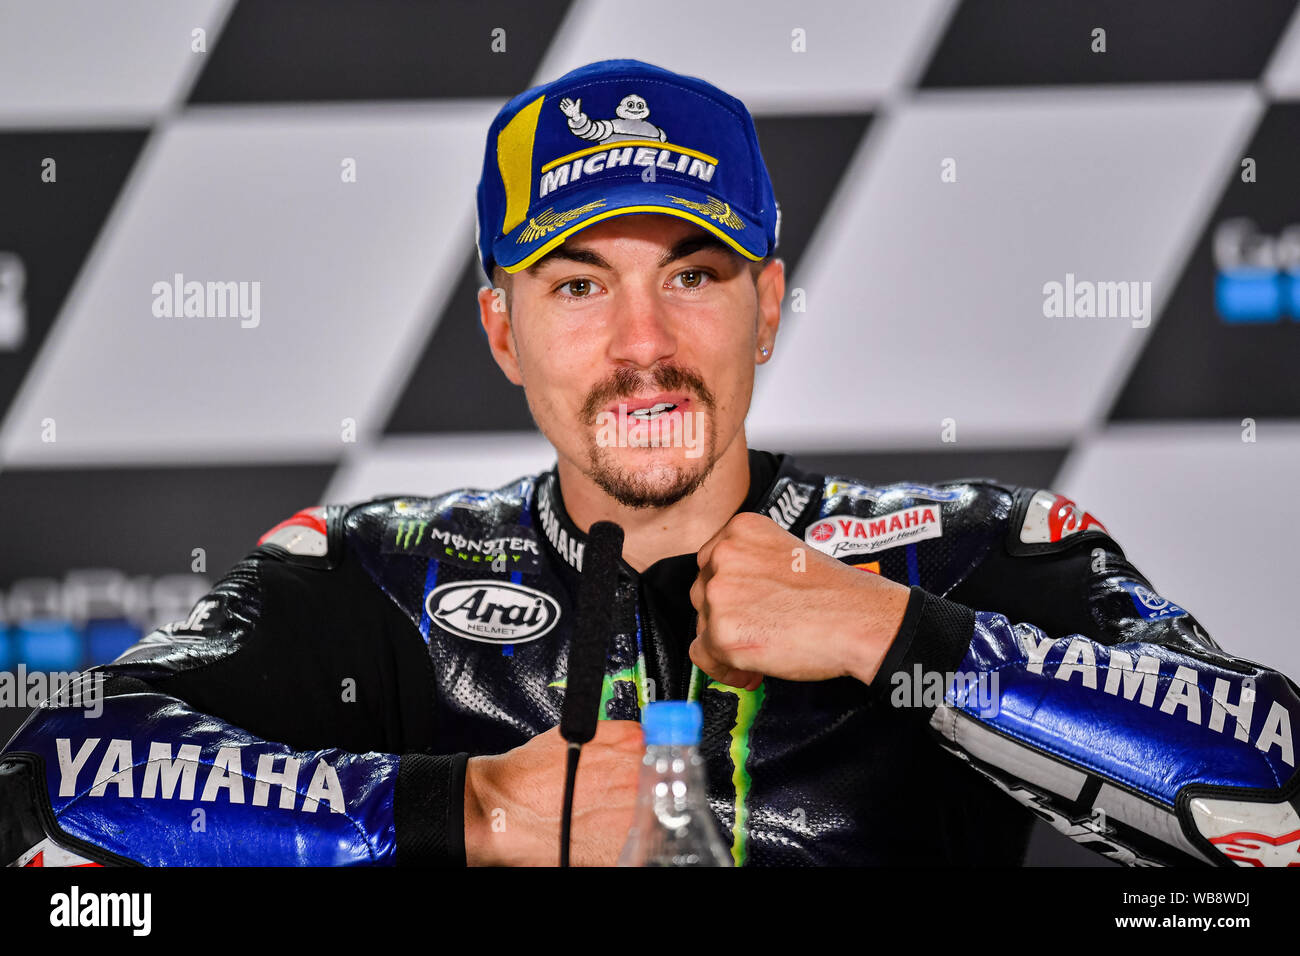 Towcester, UK. 25th Aug, 2019.  25th Aug, 2019. Maverick Vinales (SPA) of Monster Energy Yamaha MotoGP at Press Conference after Sunday’s Race of  GoPro British Grand Prix at Silverstone Circuit on Sunday, August 25, 2019 in TOWCESTER, ENGLAND. Credit: Taka G Wu/Alamy Live News Stock Photo